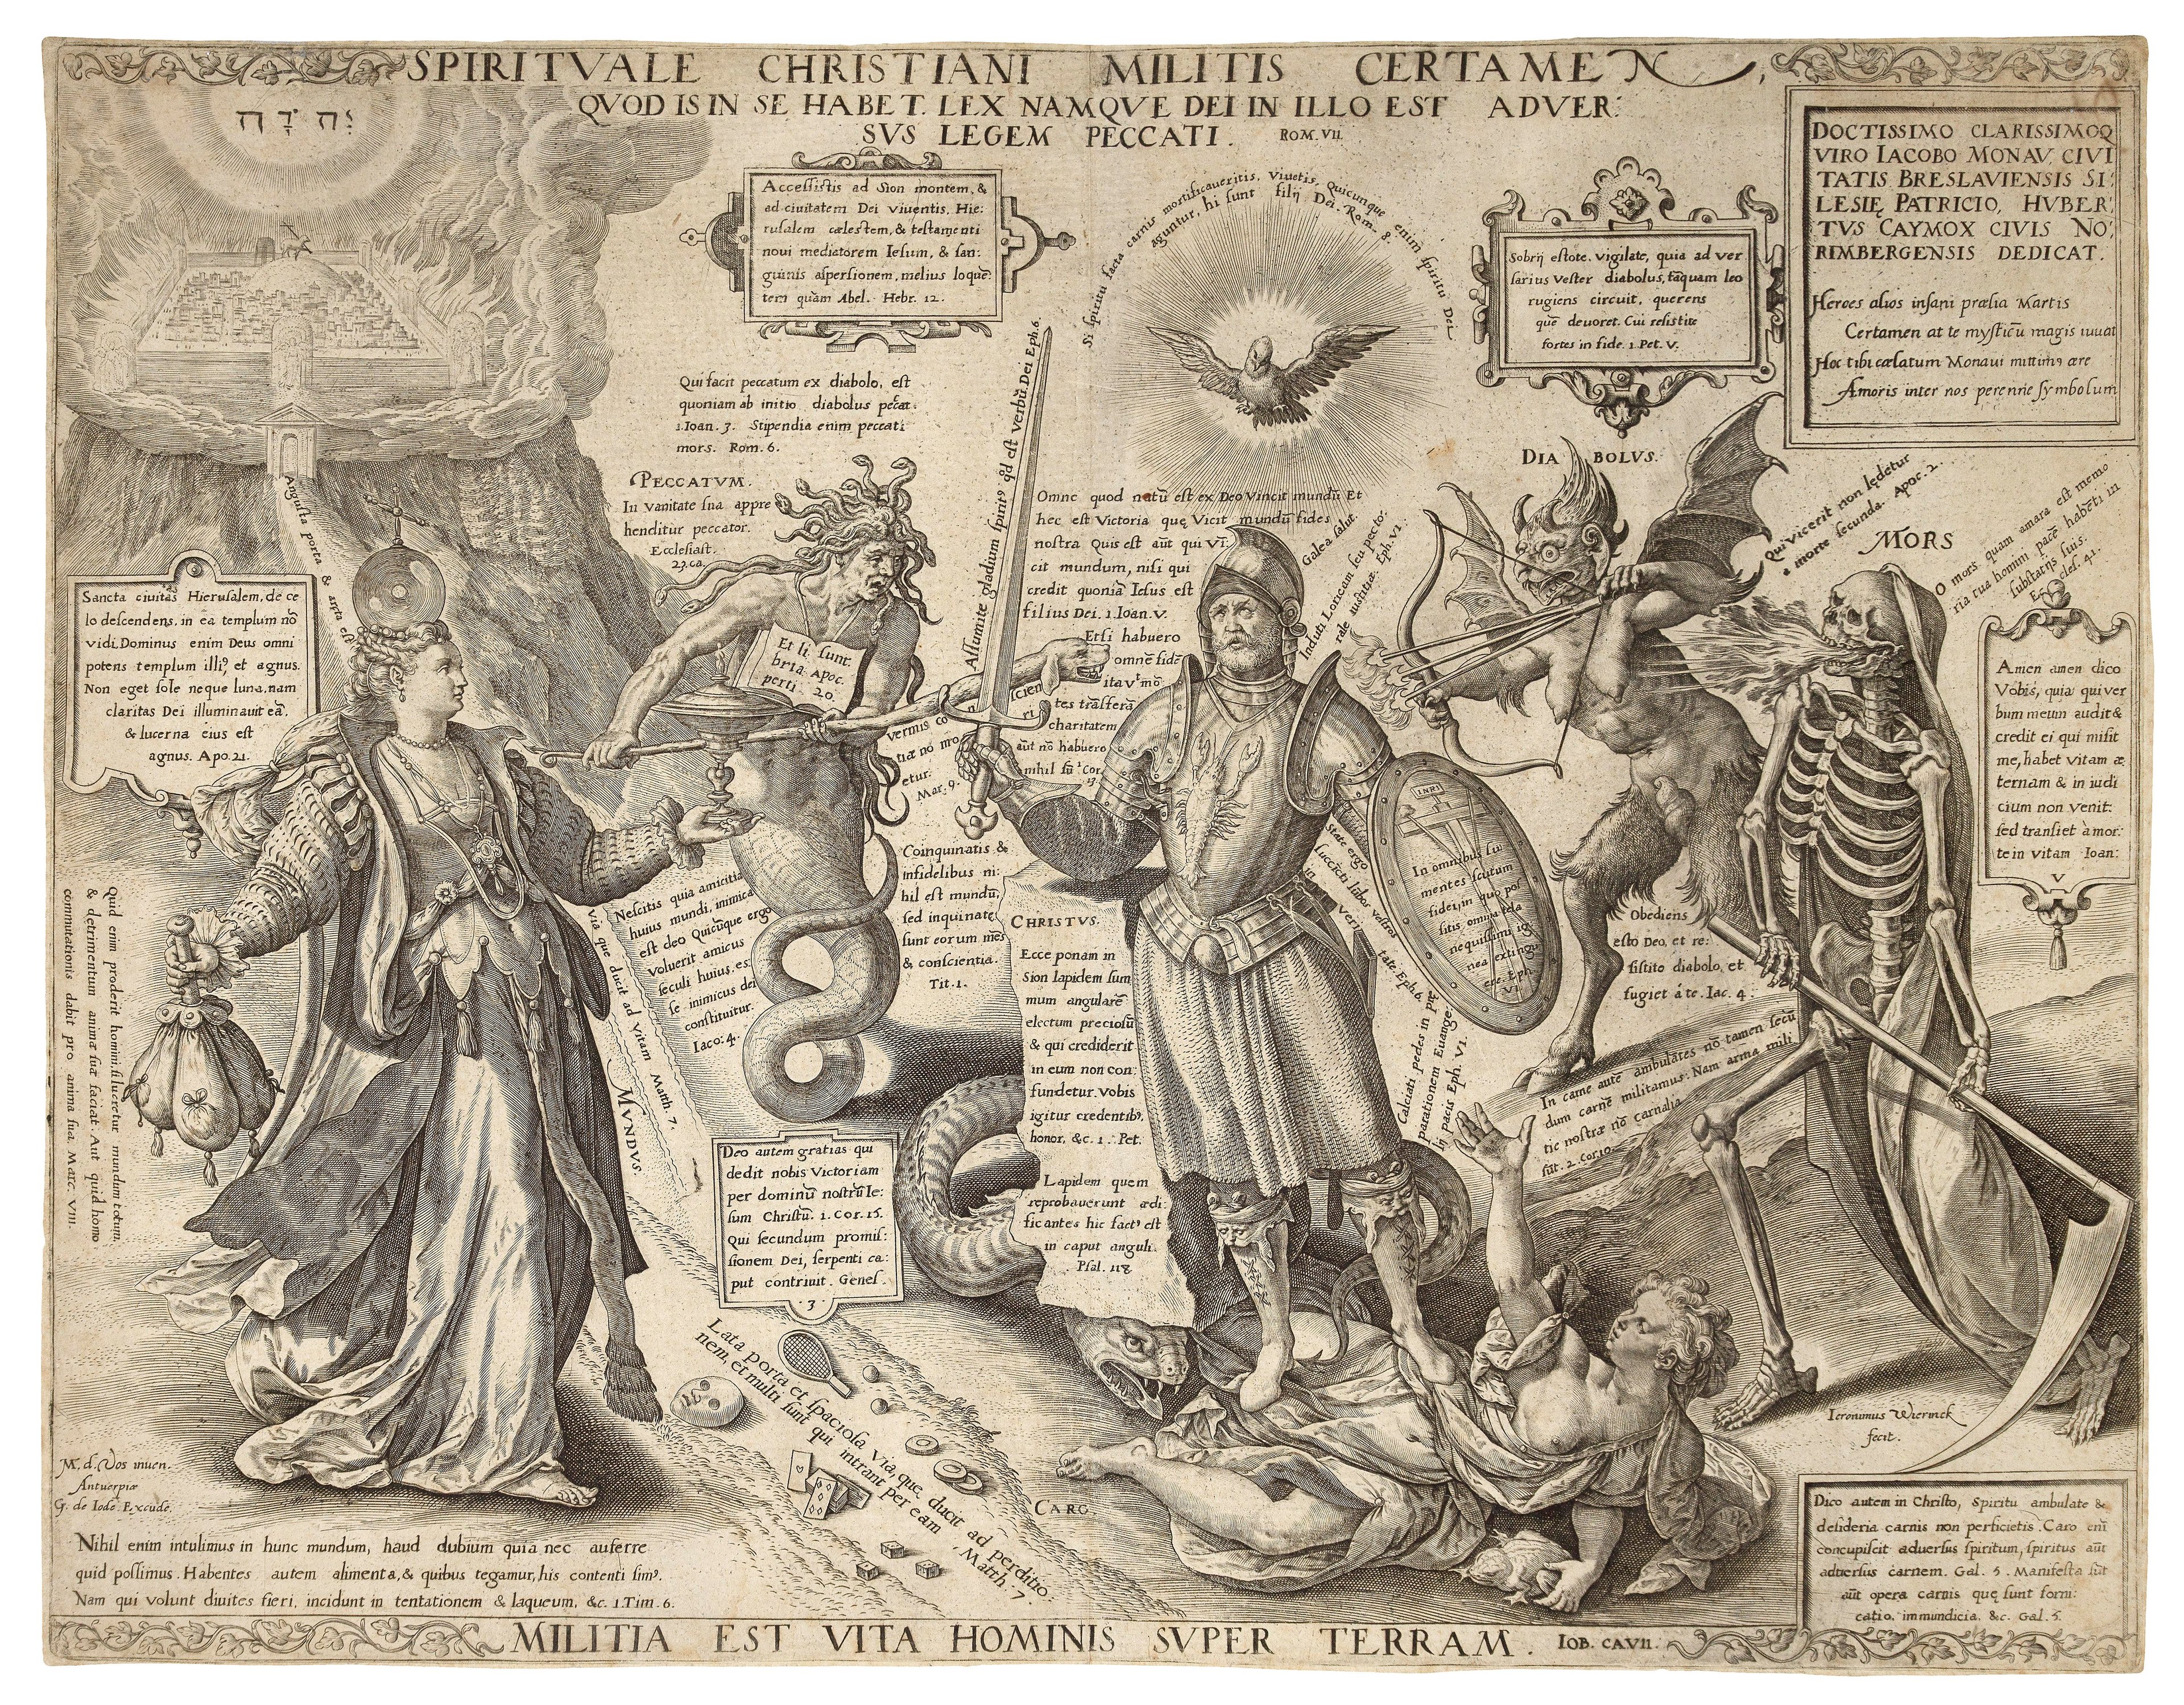 A print from an engraving, there is a solider standing above a woman with a serpent next to her on the ground, there is an angel and a well dressed woman to the left of the soldier. On the right side of the solider, there is a devil with a bow & arrow and a figure of Death.